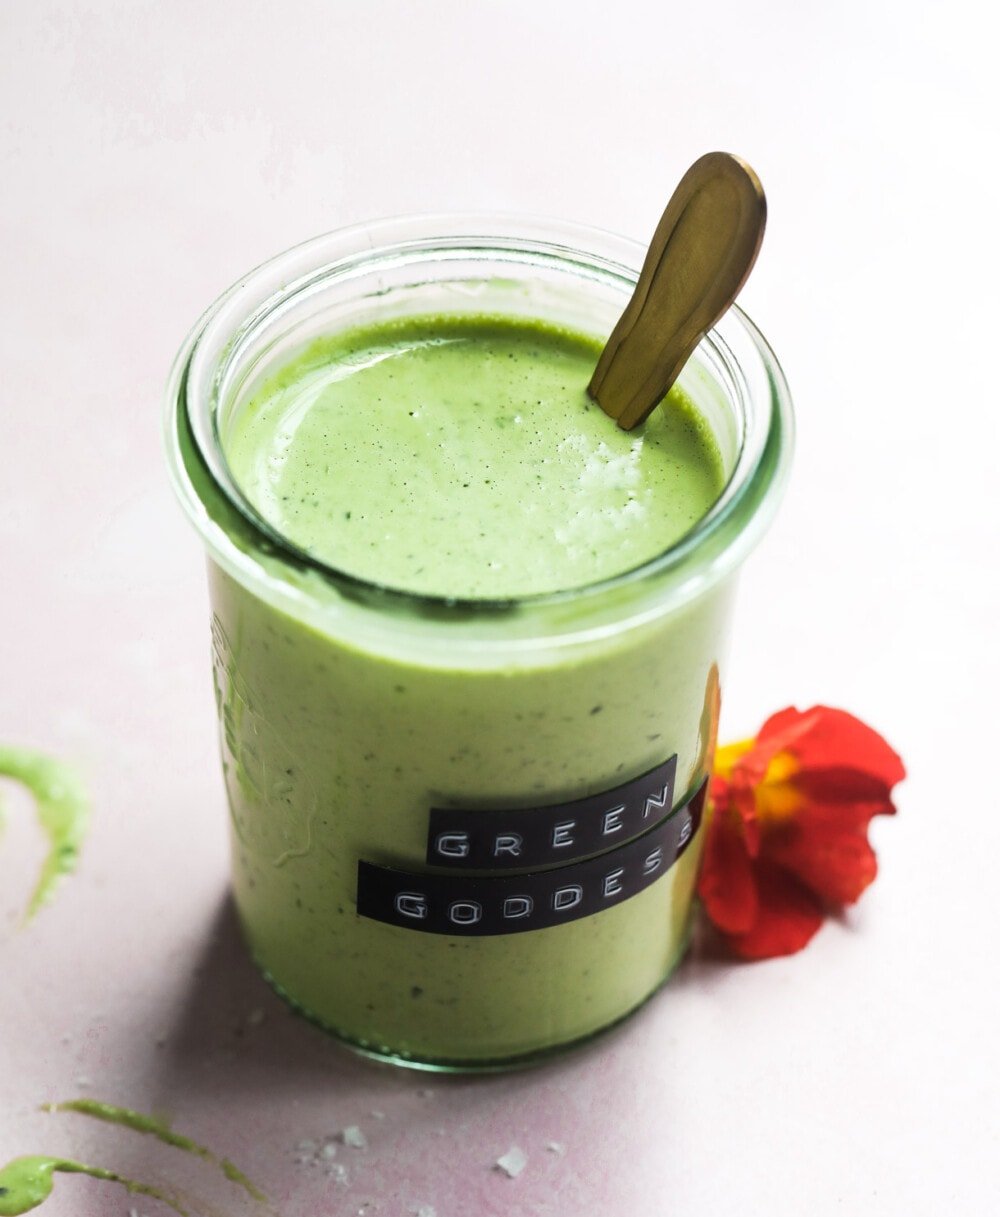 green goddess dressing in a small clear jar with red flower next to it